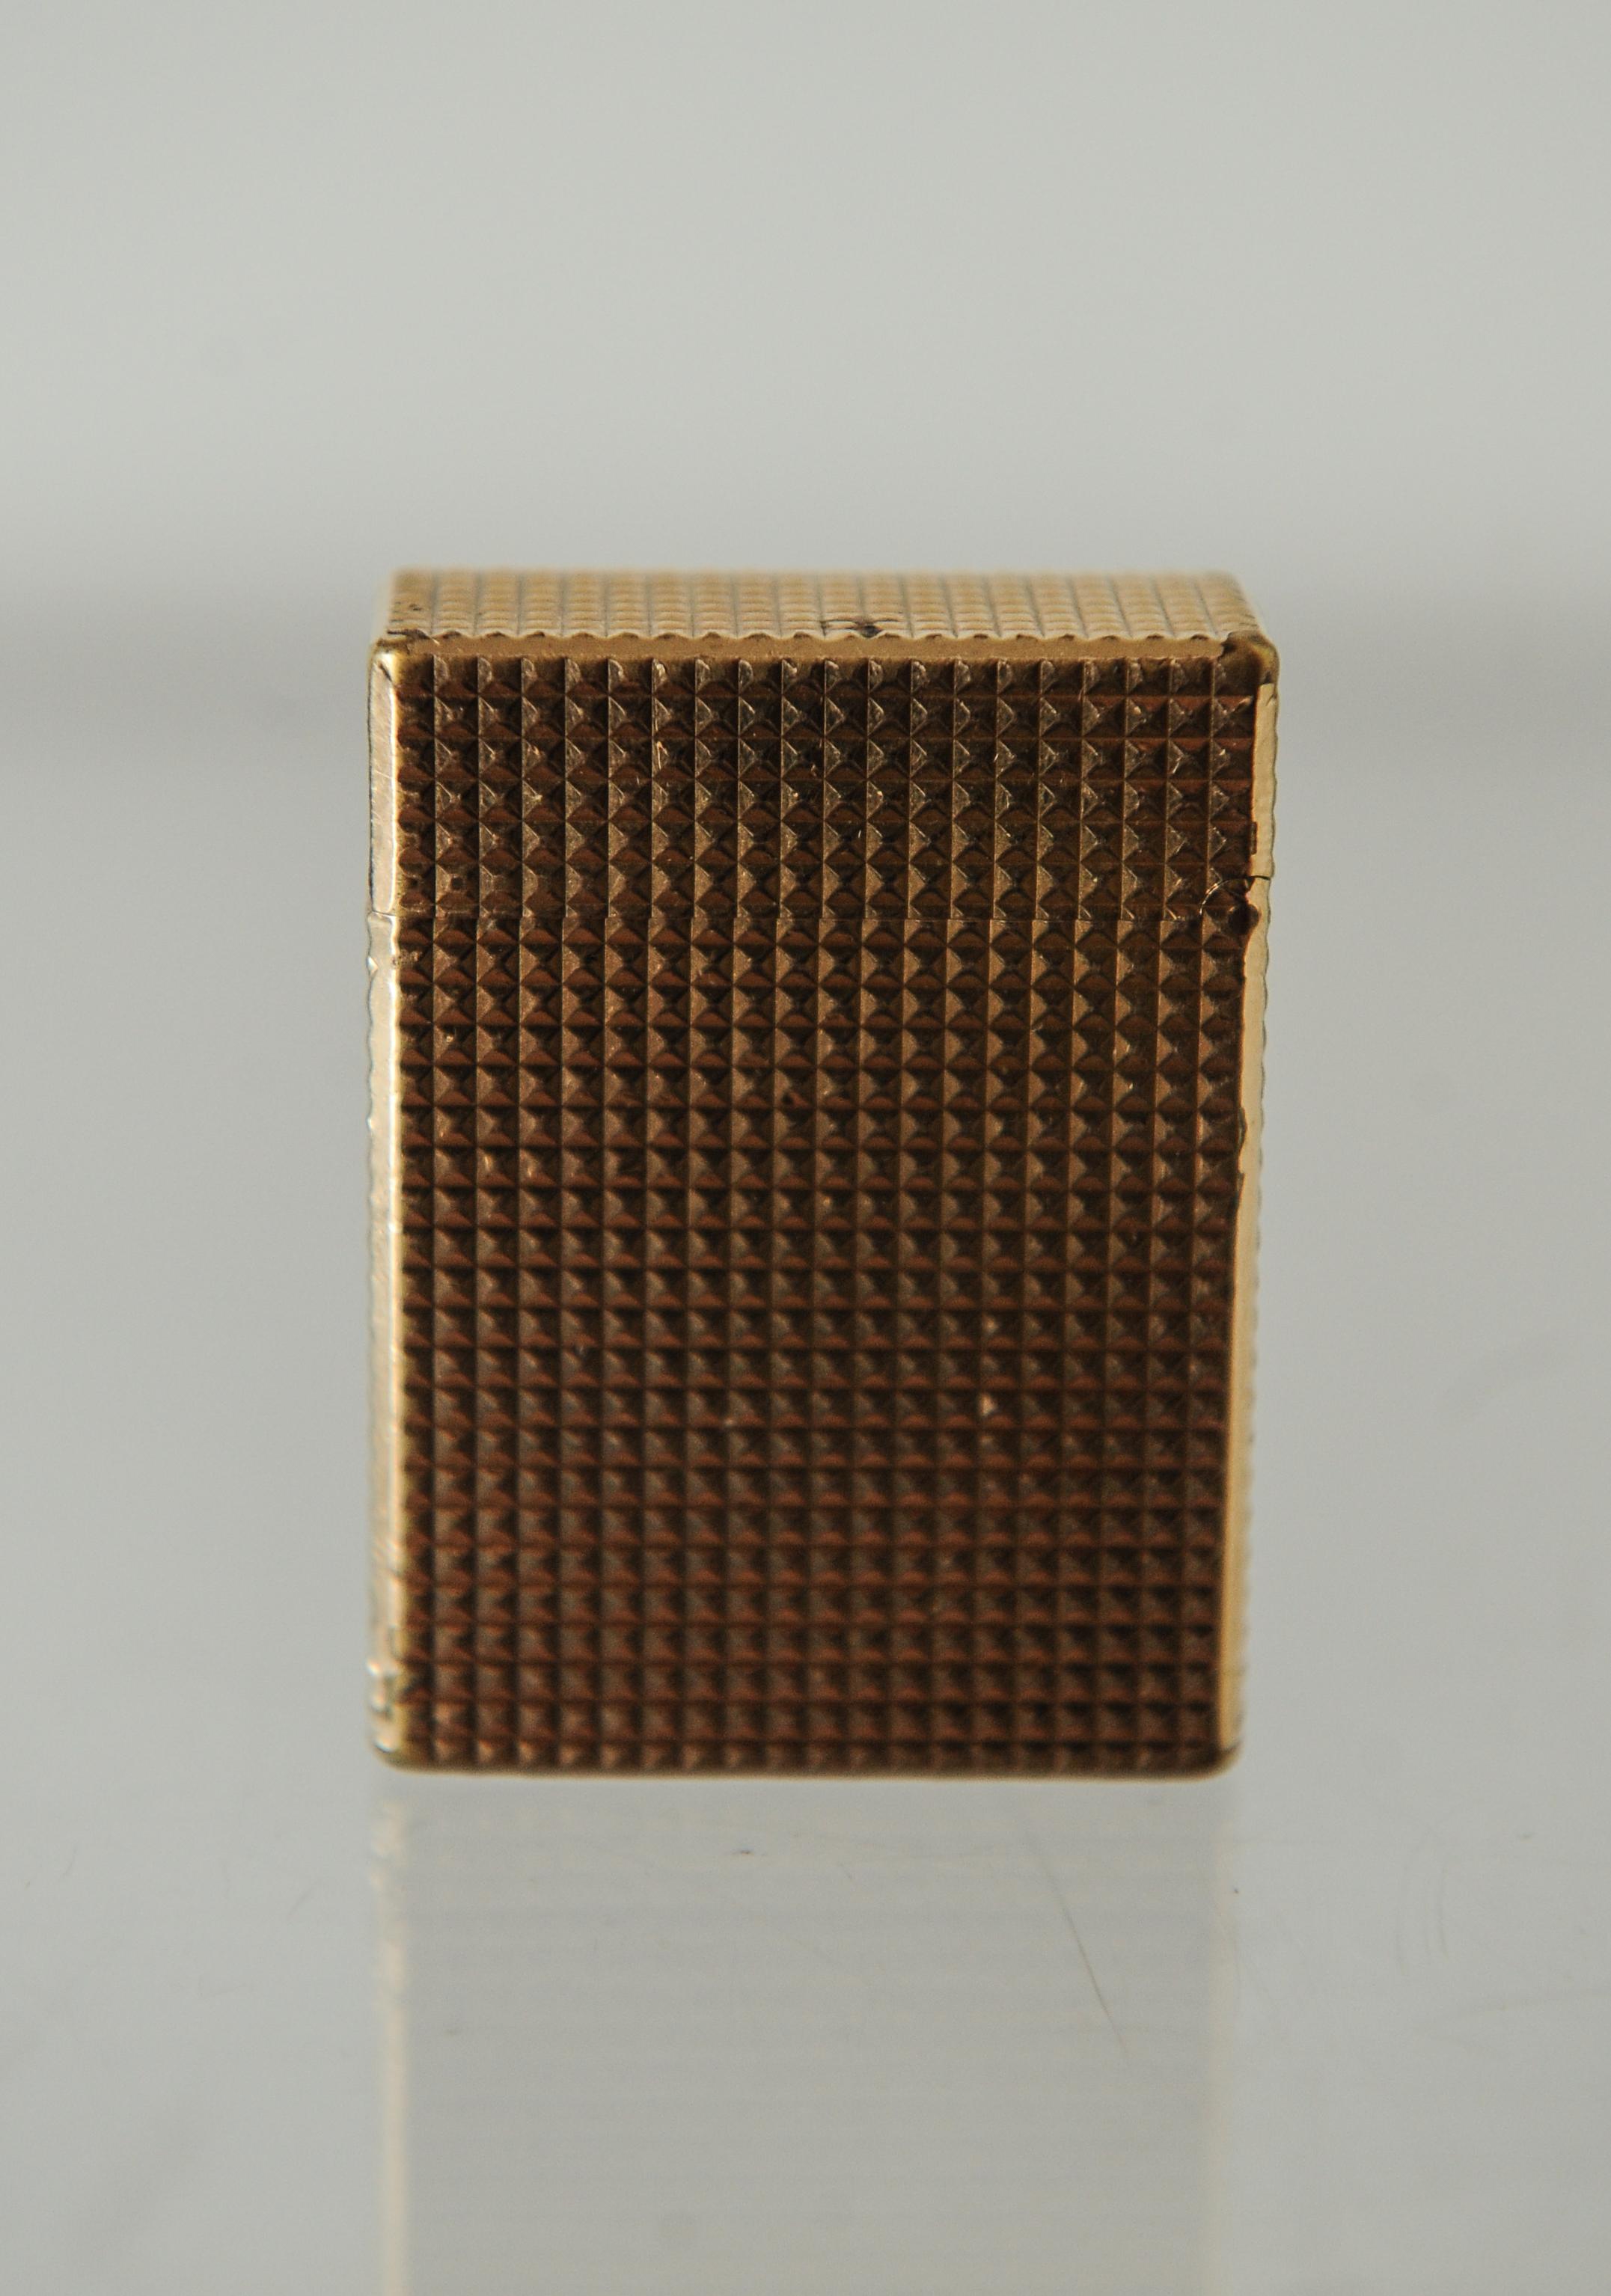 Mid-20th Century Vintage 1965 ST Dupont Paris Gold-Plated Lighter in Original Box For Sale